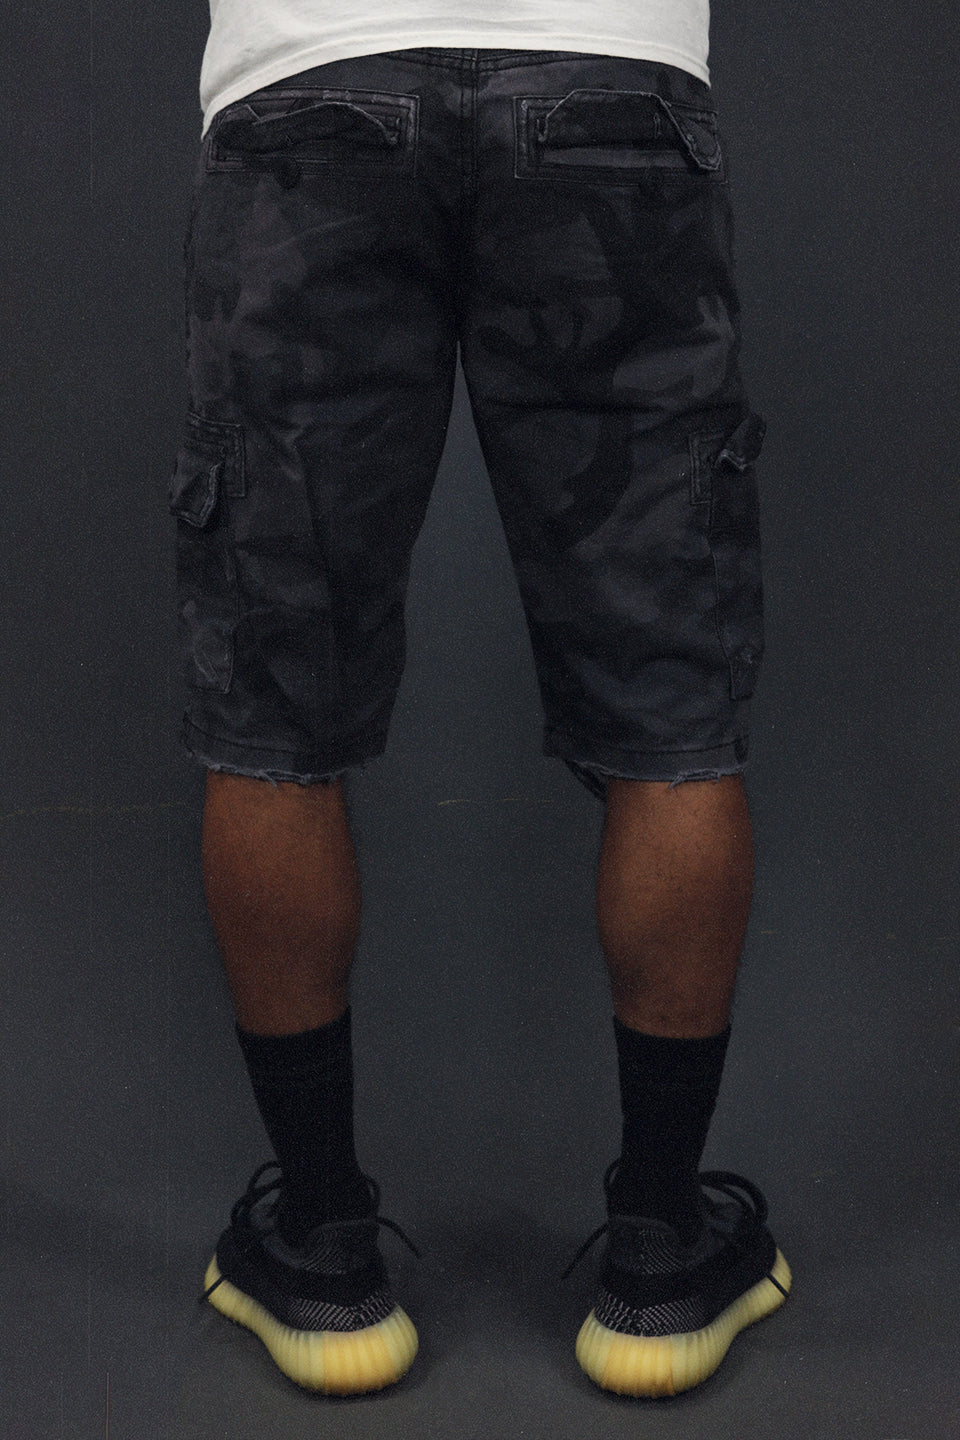 back of the Men's Ripped Black Camo Vintage Distressed Cargo Shorts | Black